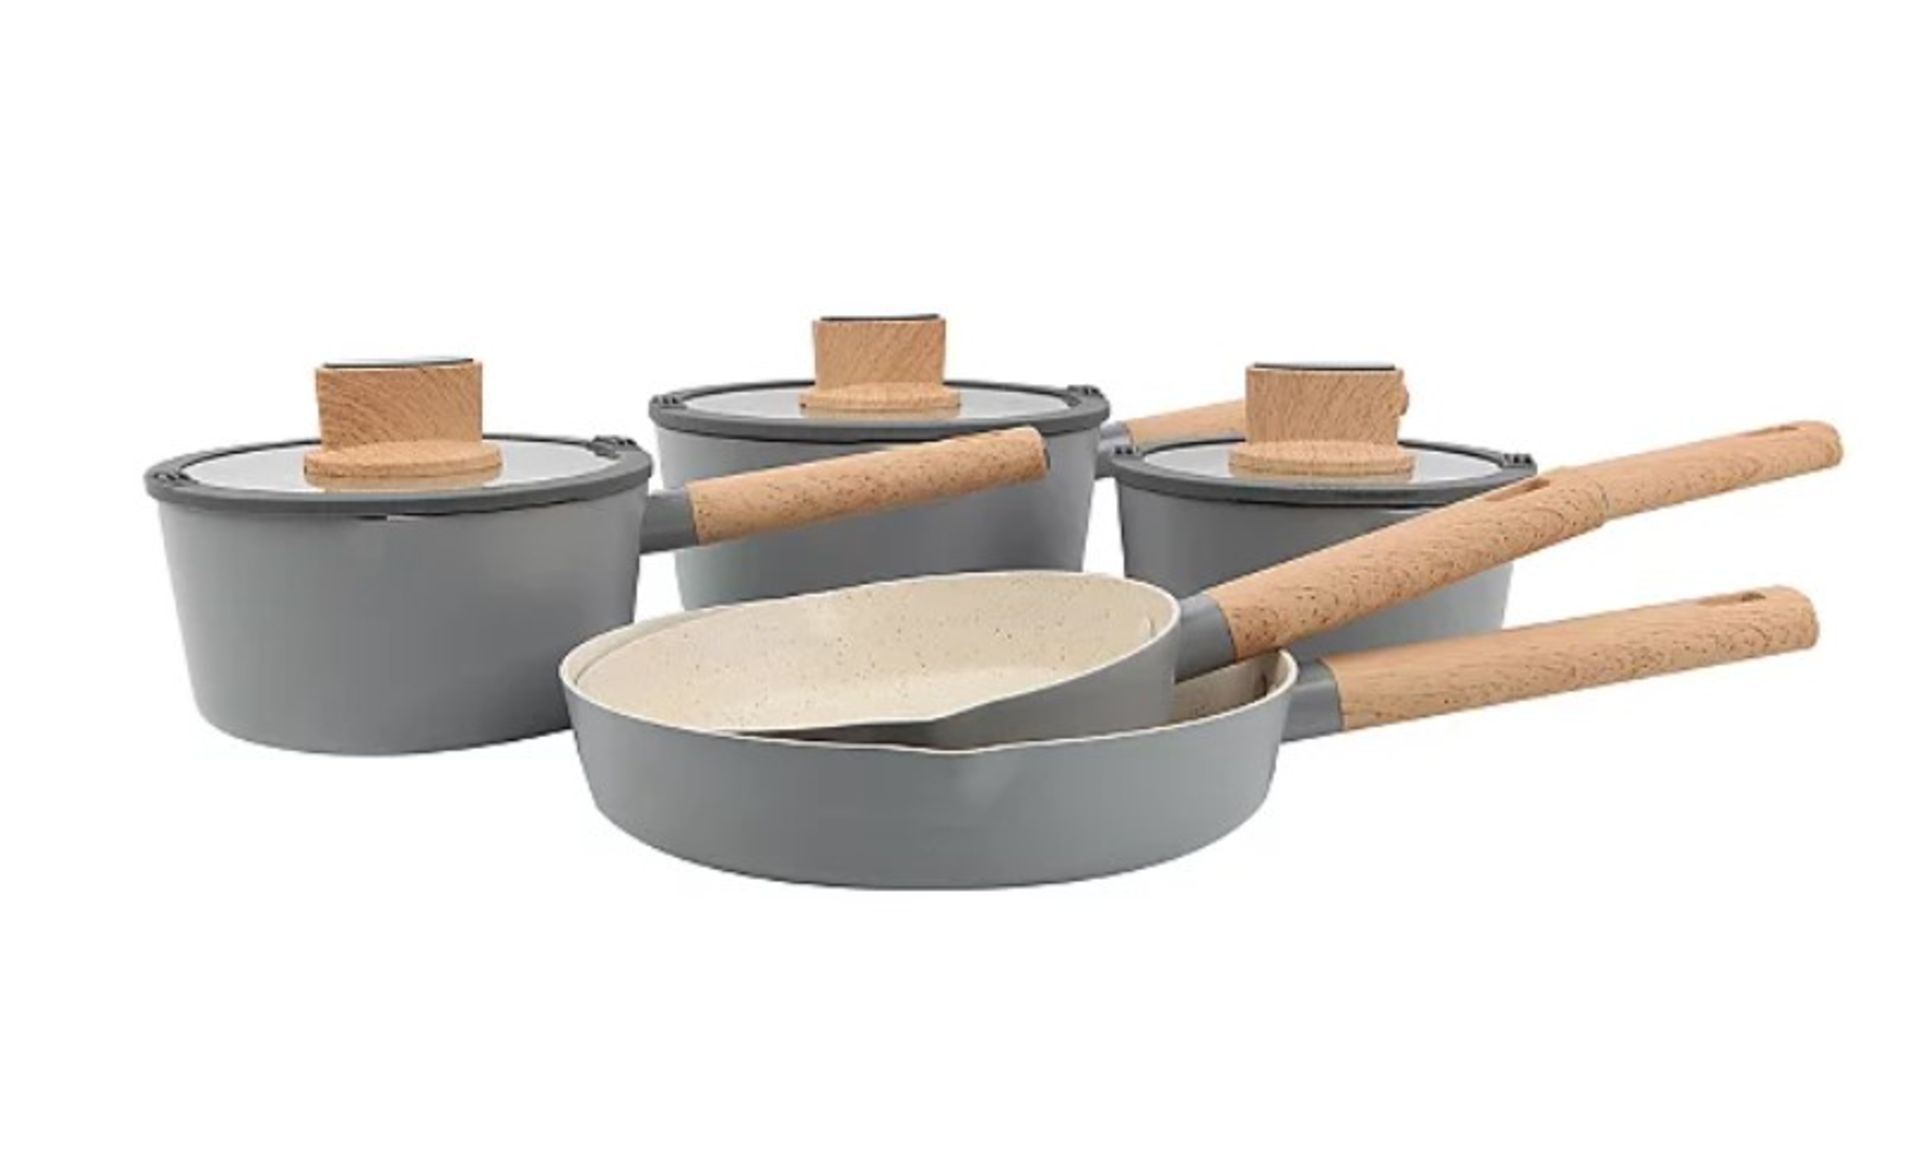 1x GH Simplicity 5 Piece Pan Set RRP £60. Pressed Aluminium. (Contents Appear As New)